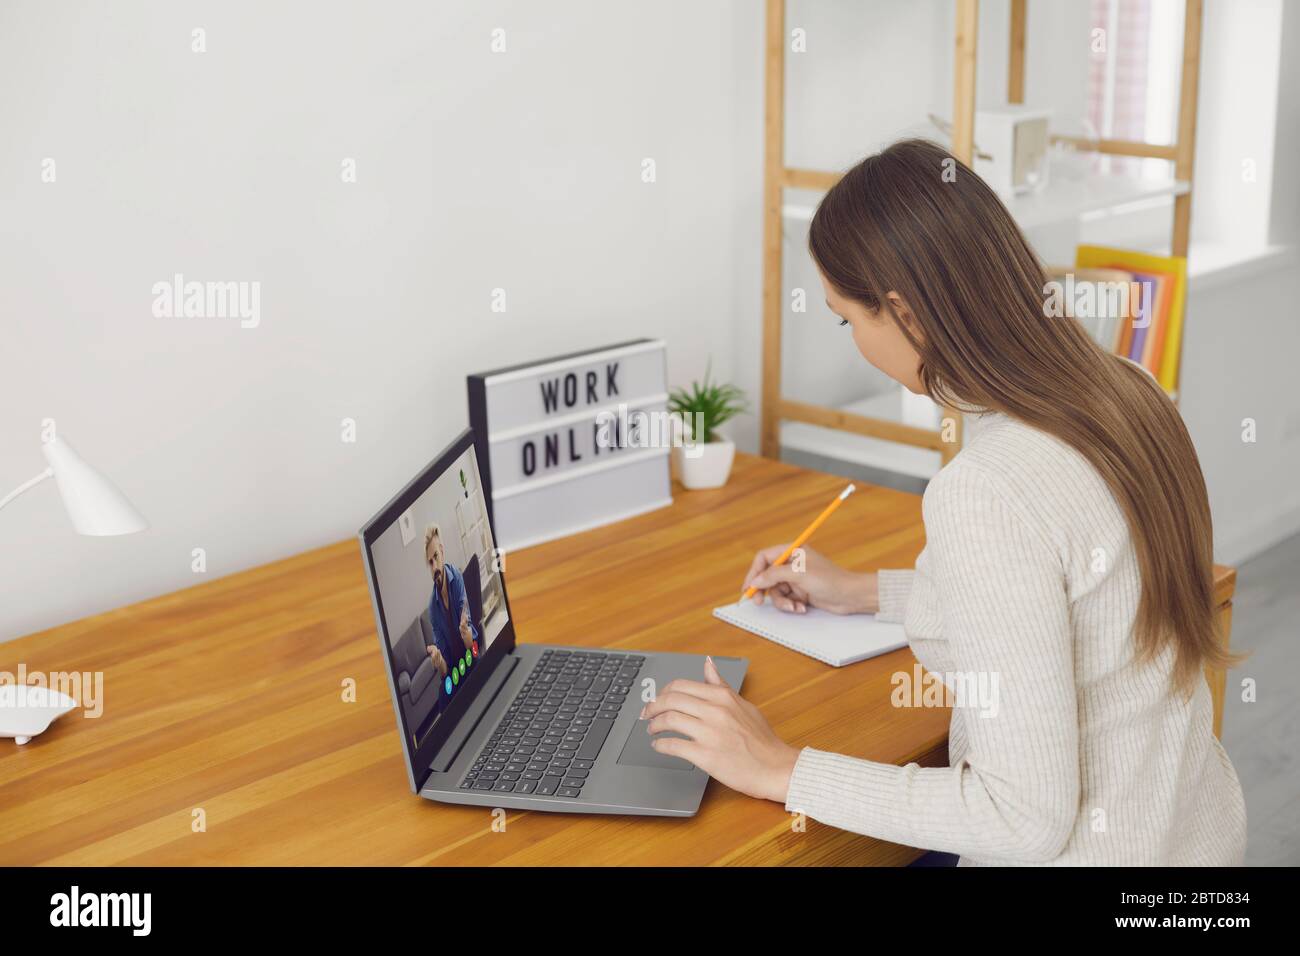 Work online. The remote employee has a video chat call using a laptop on a desk not in the workplace at home. Stock Photo